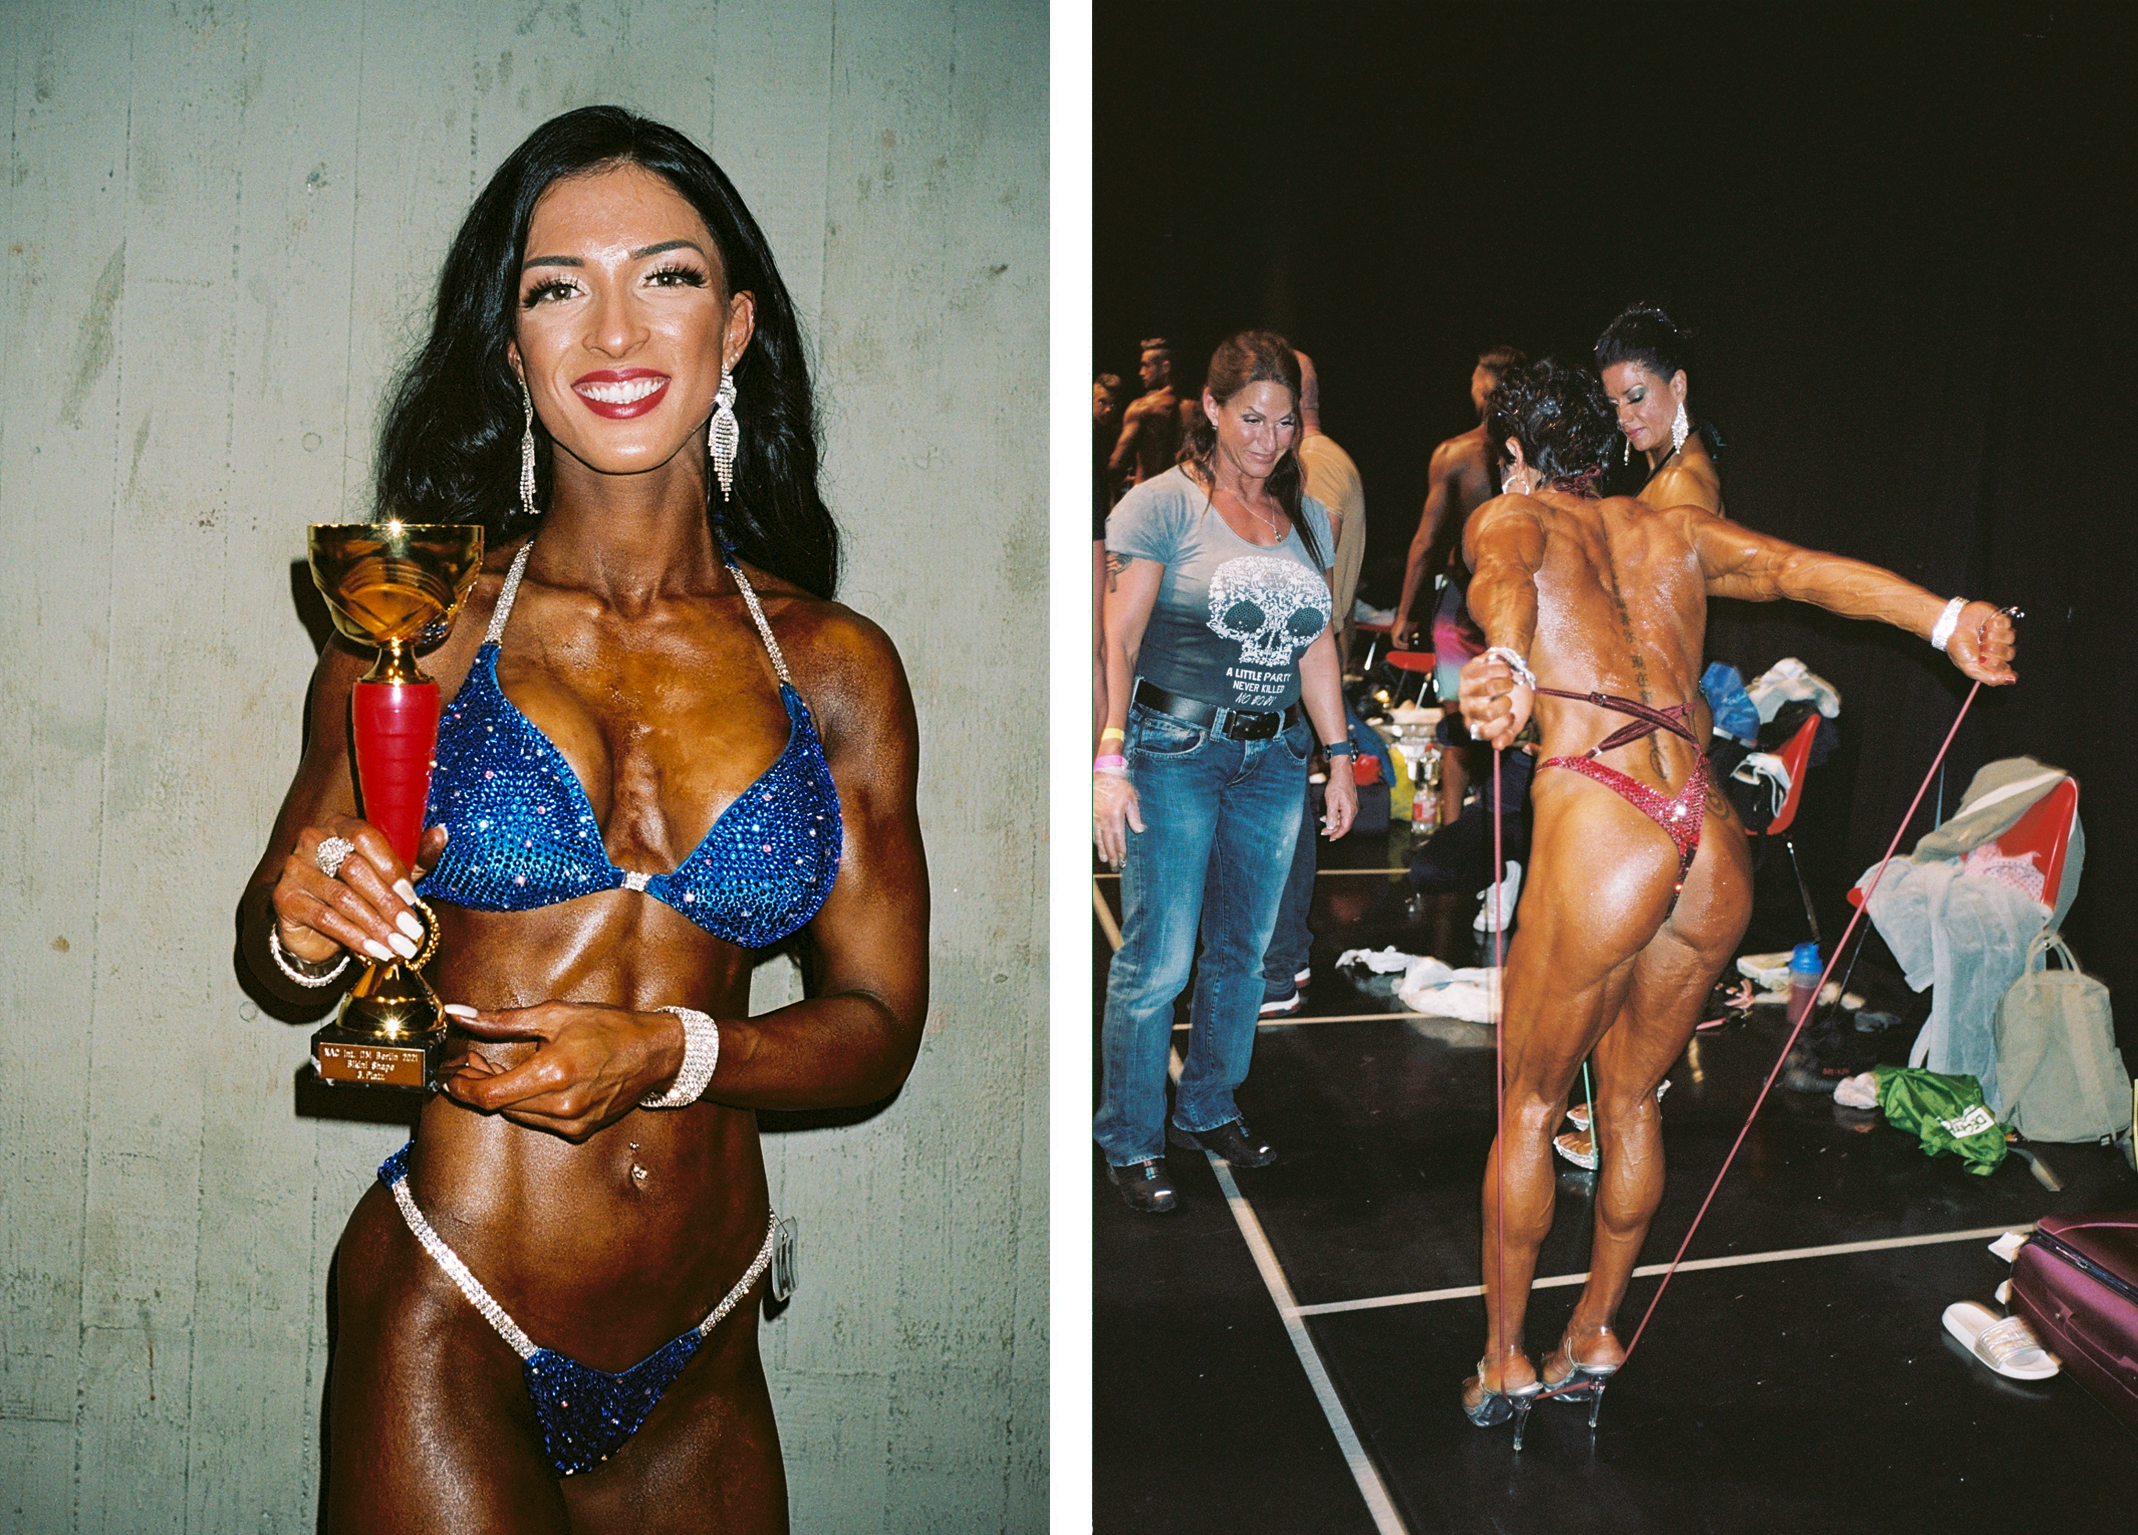 Nikolas-Petros Androbik, bodybuilding, photography - Composite image. Photo on left is a brunette female body builder holding a gold trophy, photo on the right is a female bodybuilder wearing high heels performing an exercise using elasticated rope backstage at the competition.